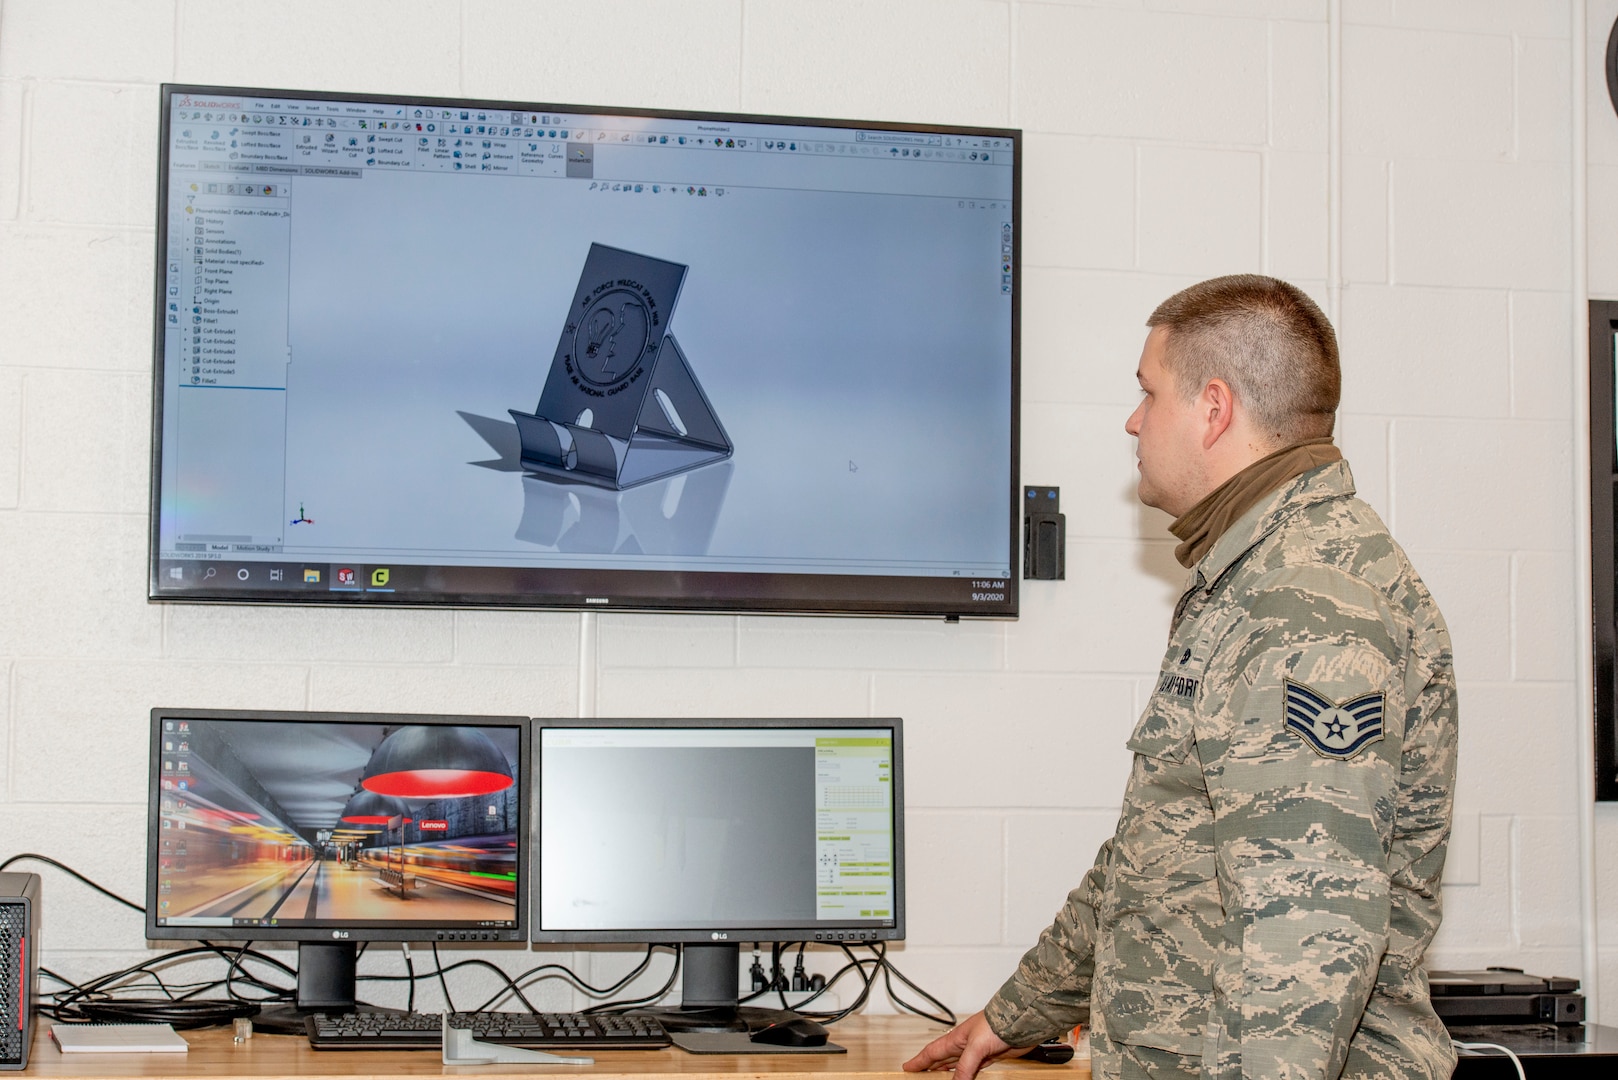 Staff Sgt. John Woodward, a metals technician with the 157th Maintenance Group, reviews a 3D printable mobile phone holder prototype at Pease Air National Guard Base, N.H., Sept. 3, 2020. The unit's 3D printer allows technicians to create prototypes, plastic tools and molds for crafting multifaceted equipment. (U.S. Air National Guard photo by Staff Sgt. Victoria Nelson)